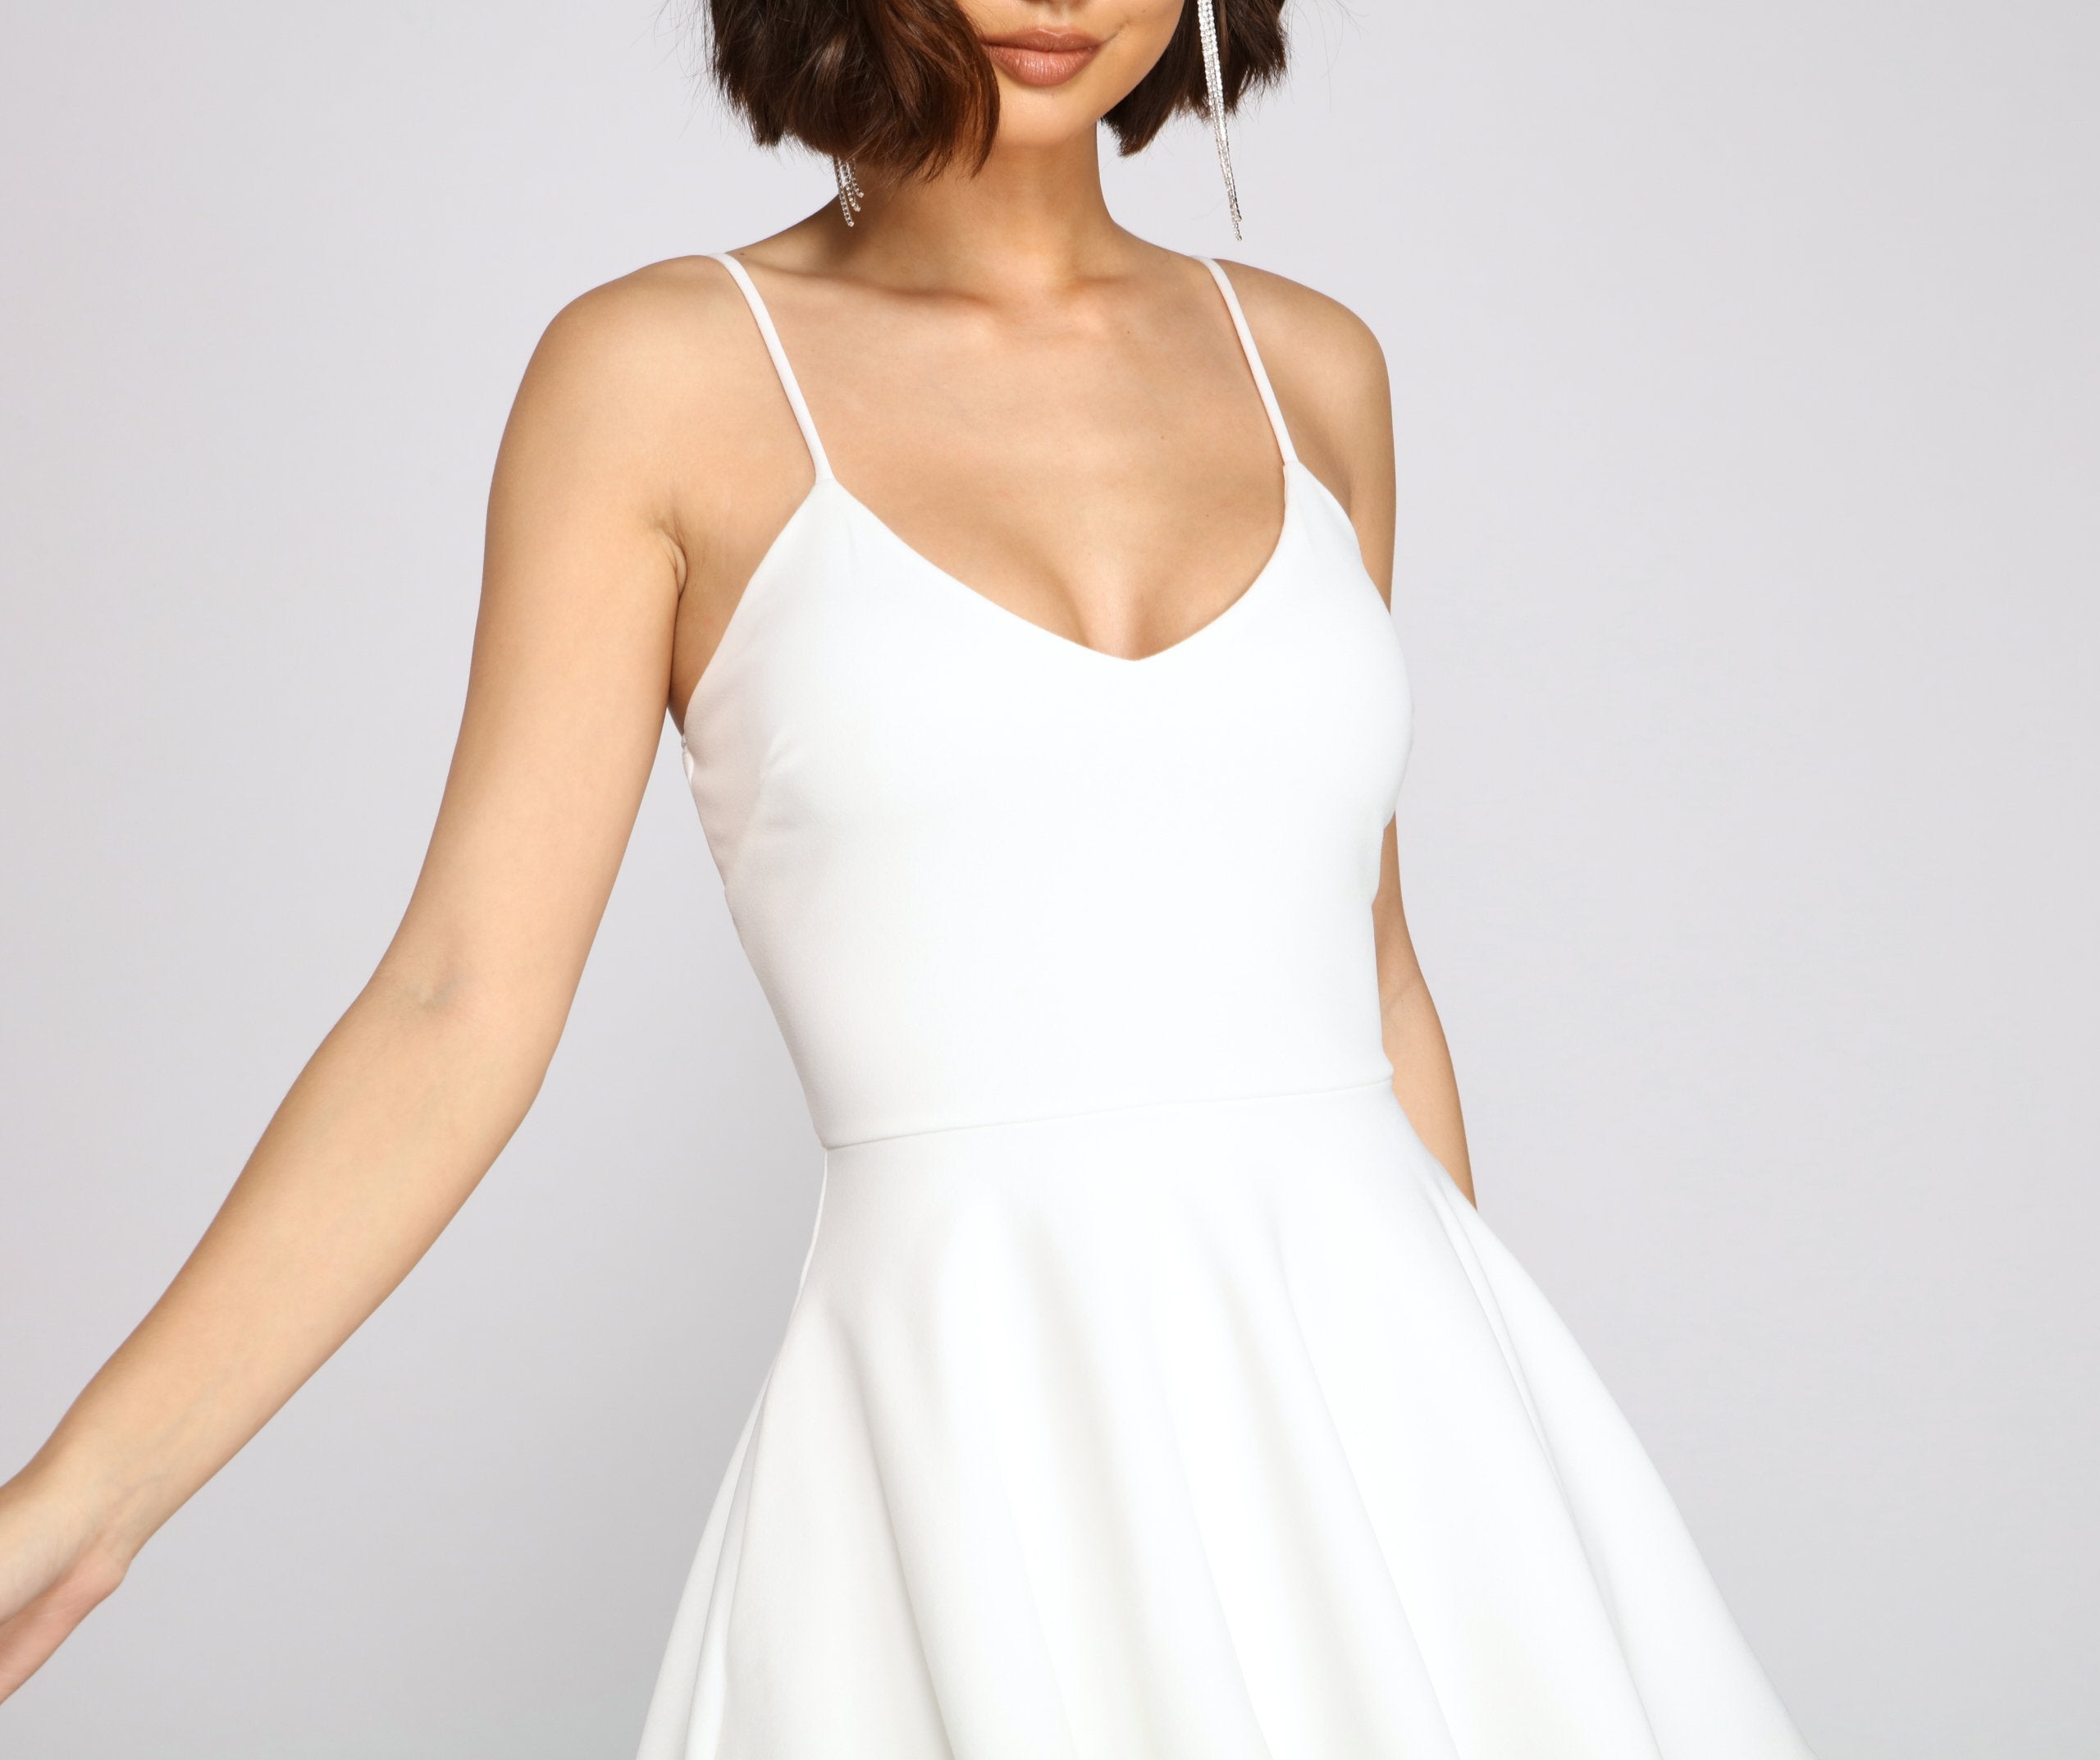 Simply Adorable Layered Skater Dress